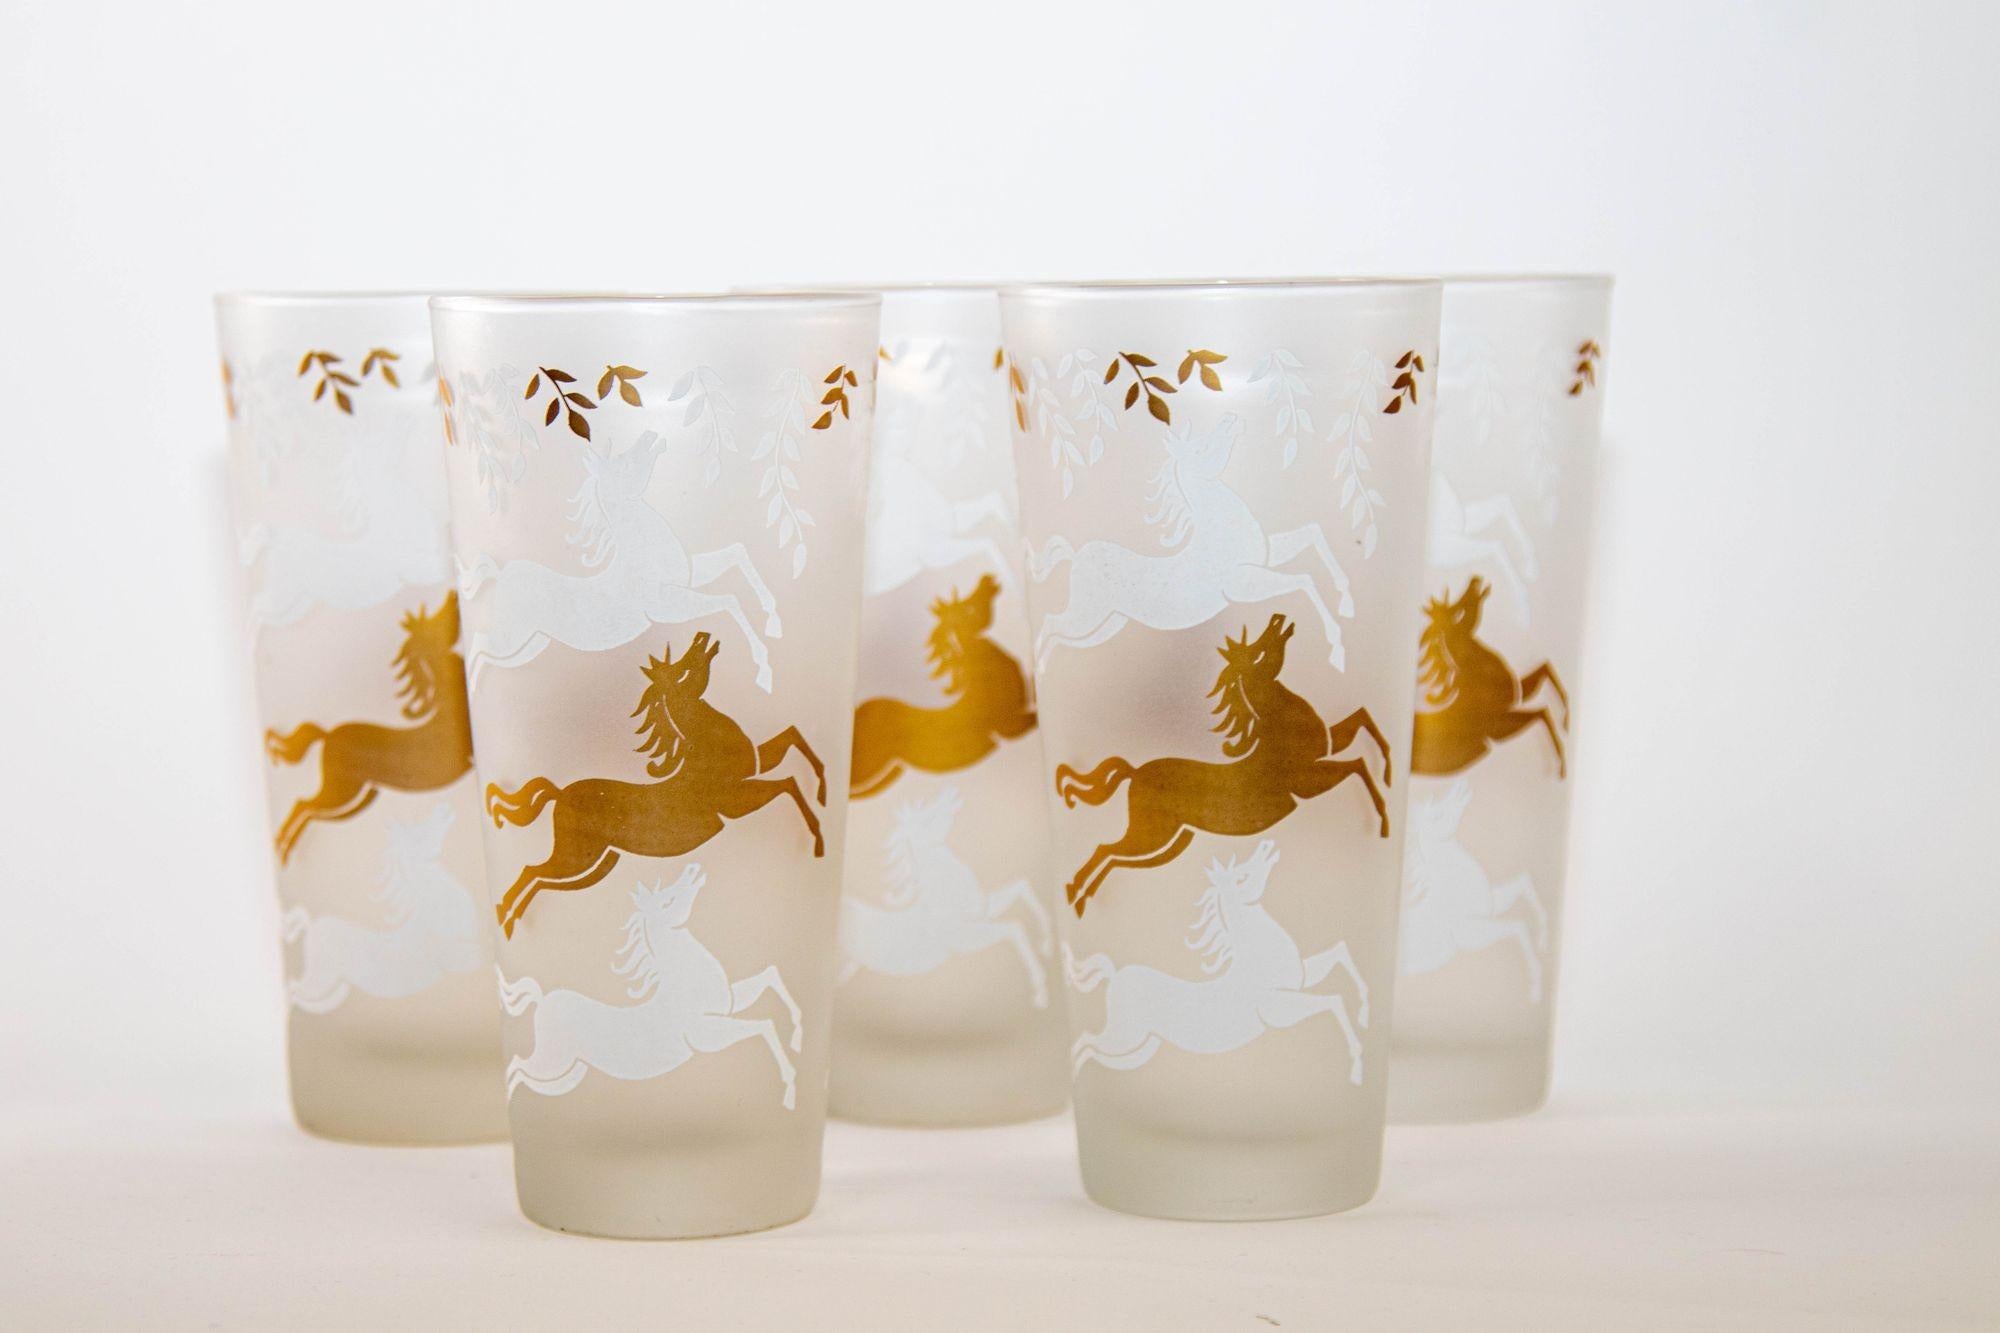 1950s Cavalcade by Libbey Galloping Horse Tumbler Glasses Gold and frosted white, set of 5.
Set of Mid-Century Modern frosted horse high ball tumblers glasses frosted white and gold toned cavalcade of stallions.
Fabulous and fun set to enjoy a